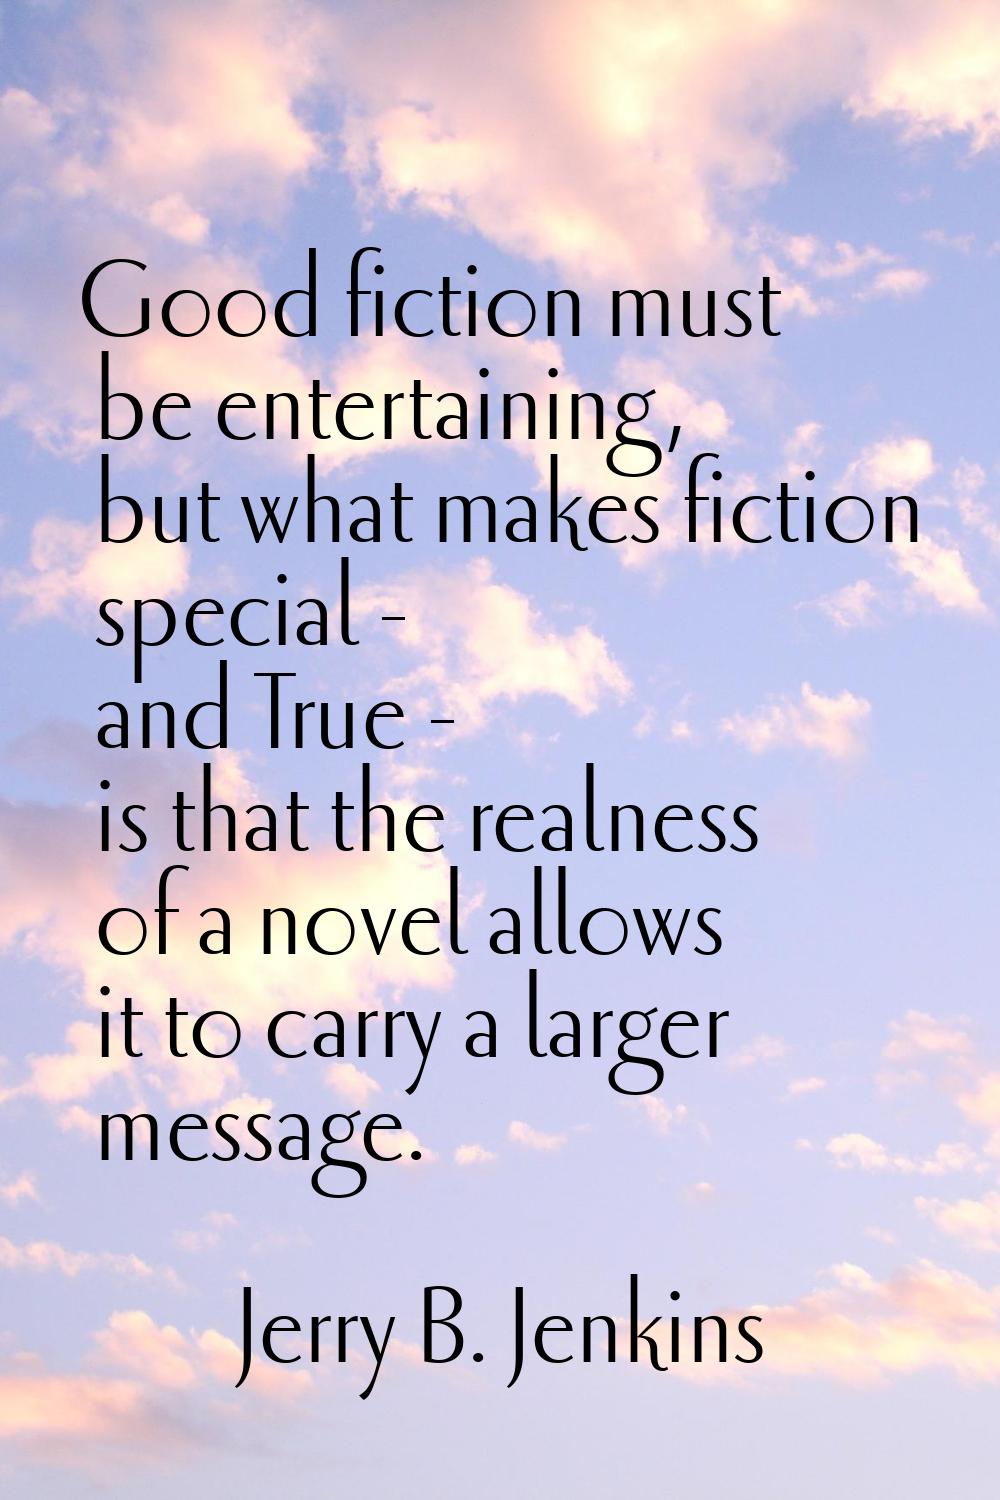 Good fiction must be entertaining, but what makes fiction special - and True - is that the realness